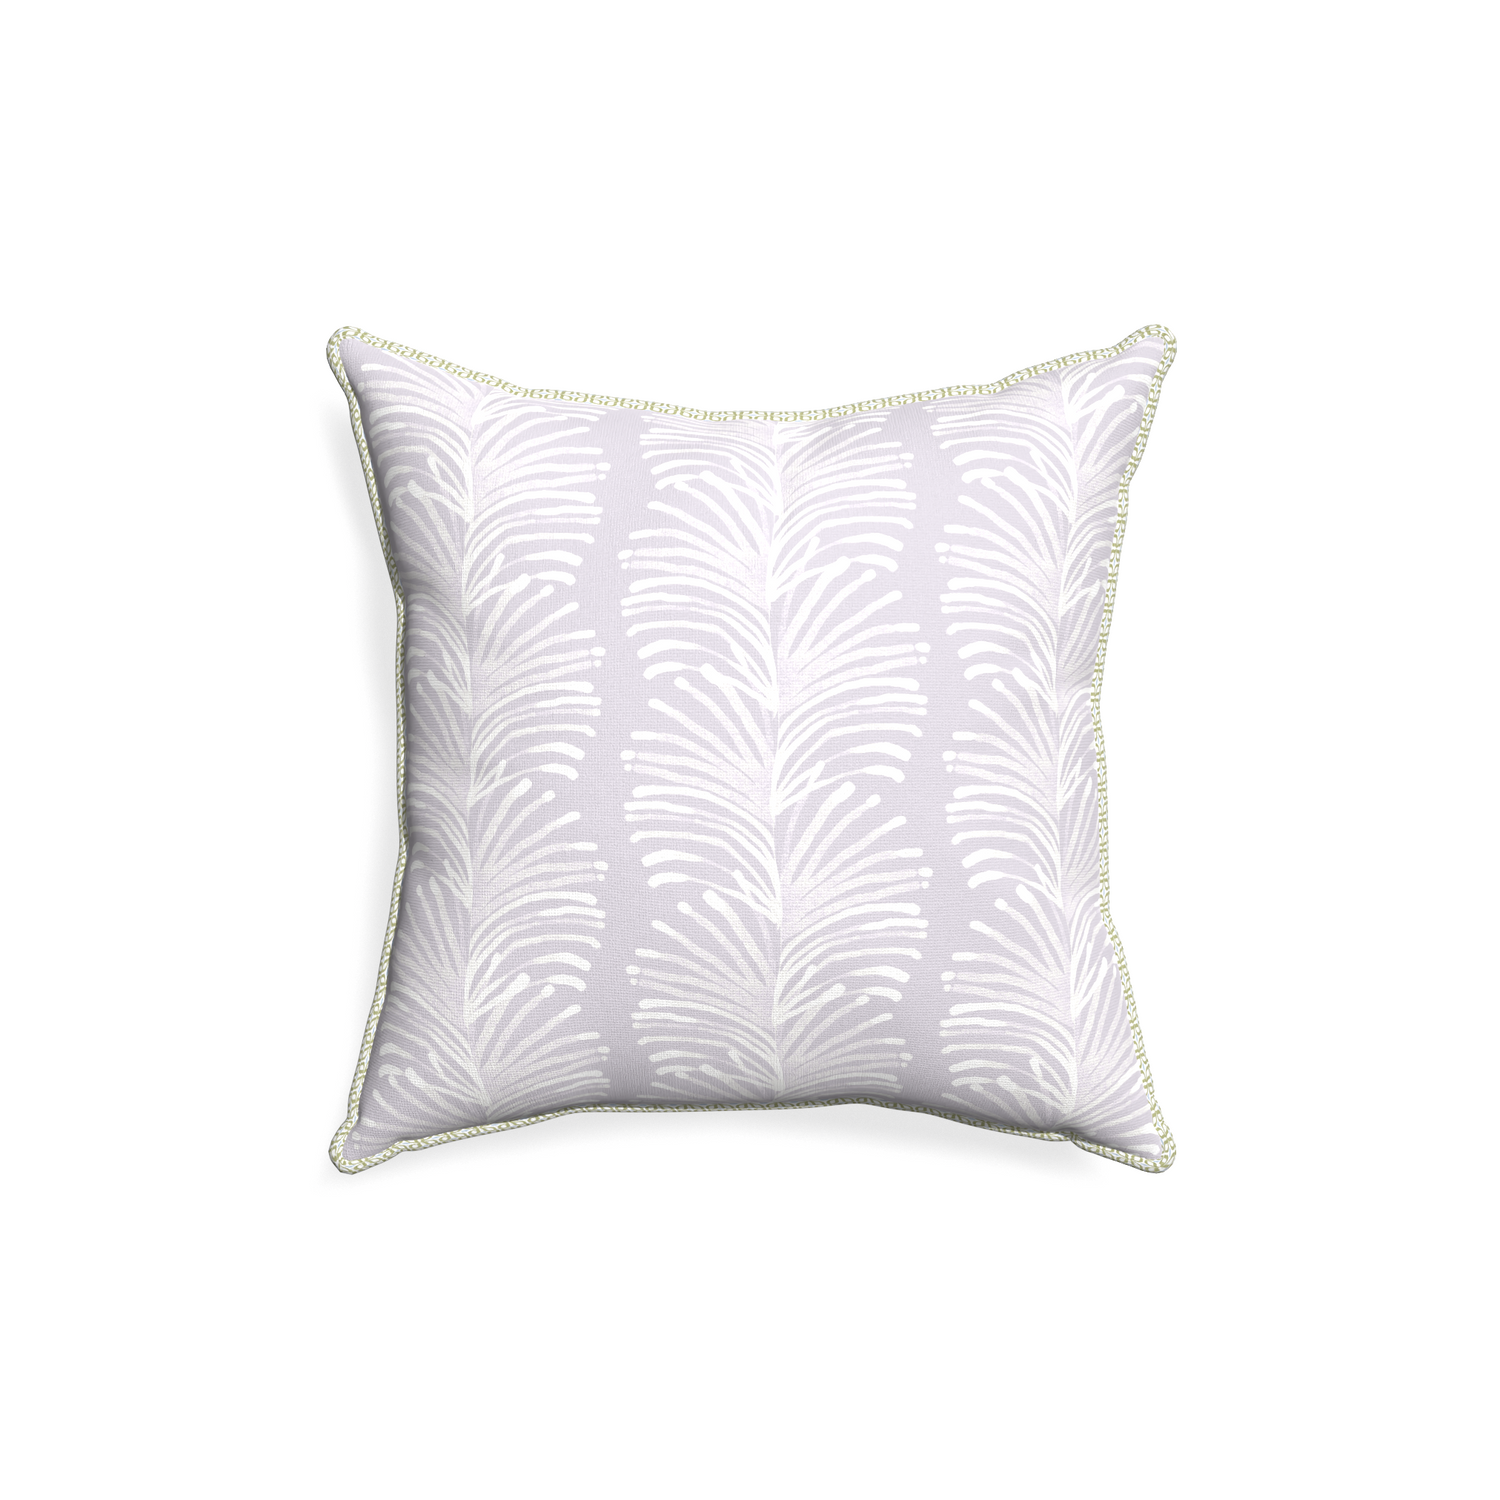 18-square emma lavender custom pillow with l piping on white background